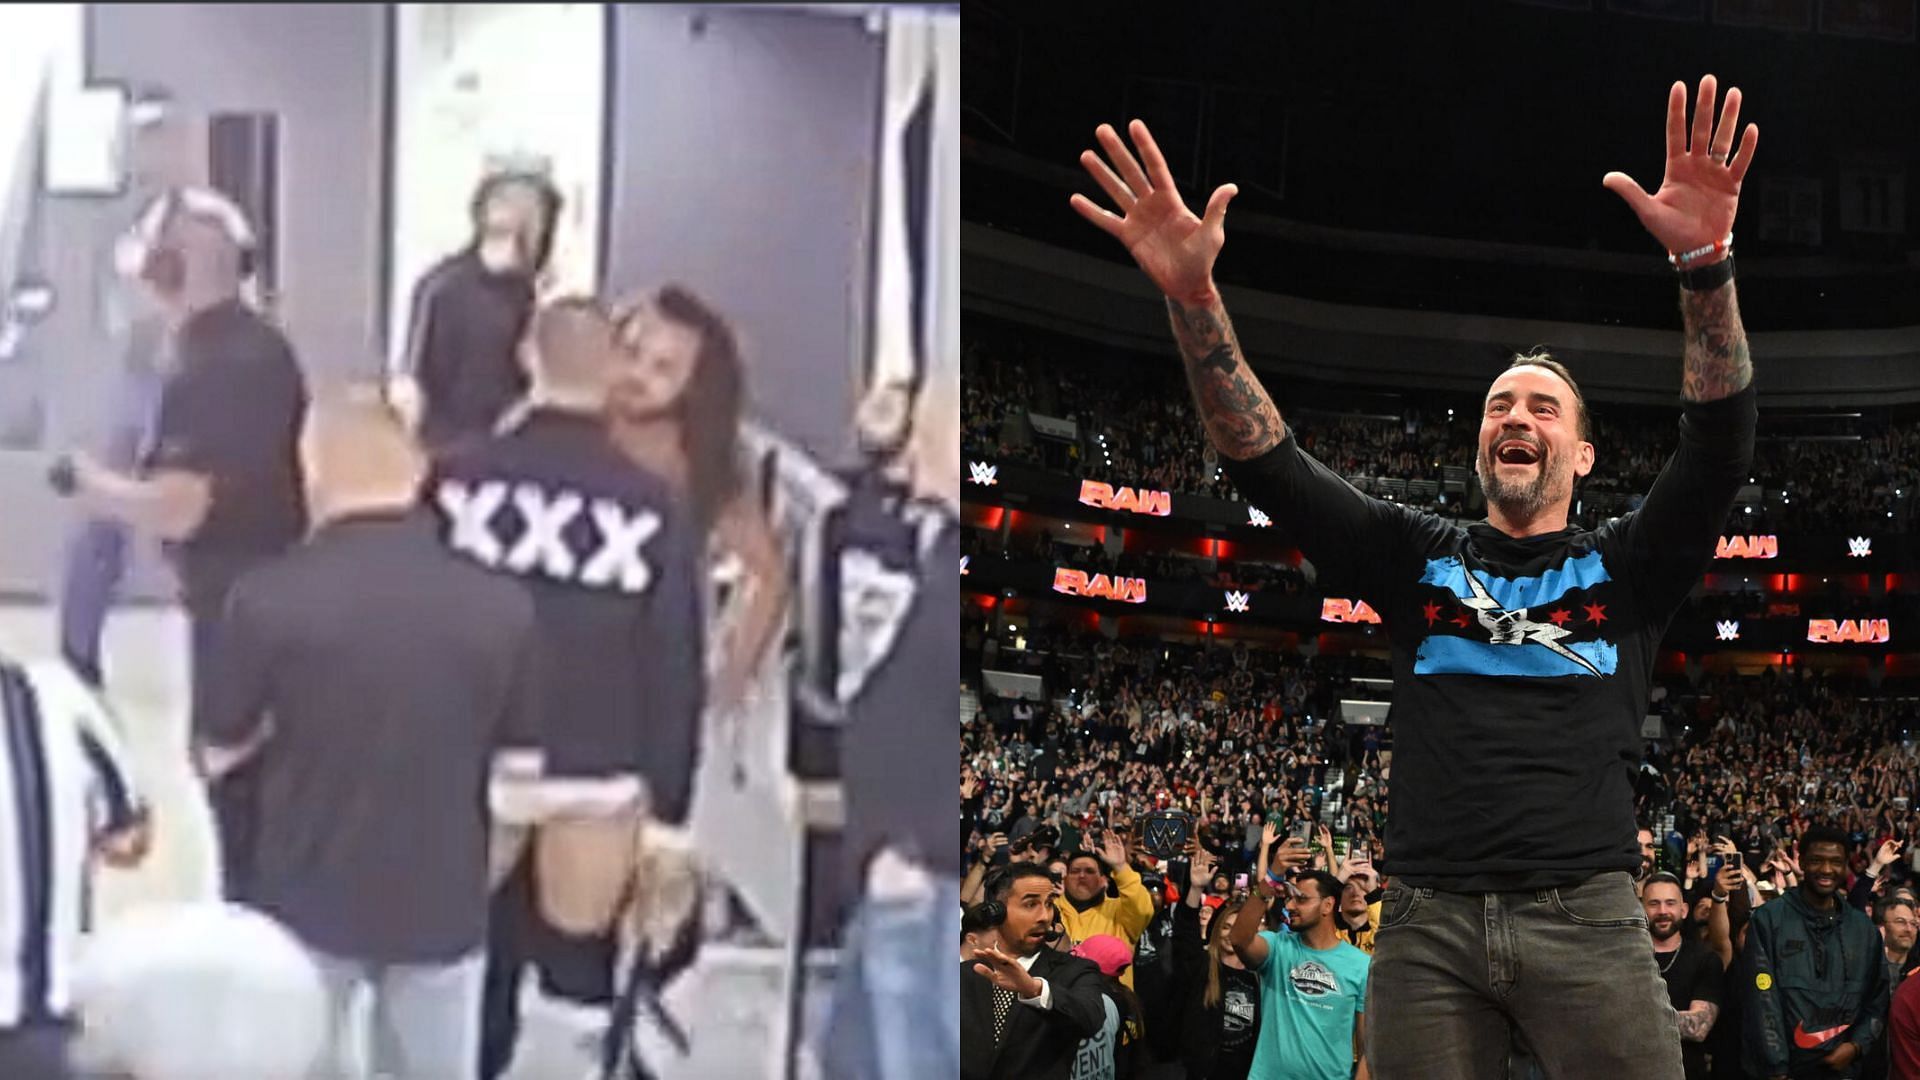 CM Punk and Jack Perry were involved in a scuffle at All In which resulted in their eventual release and suspension respectively [Photo courtesy of WWE